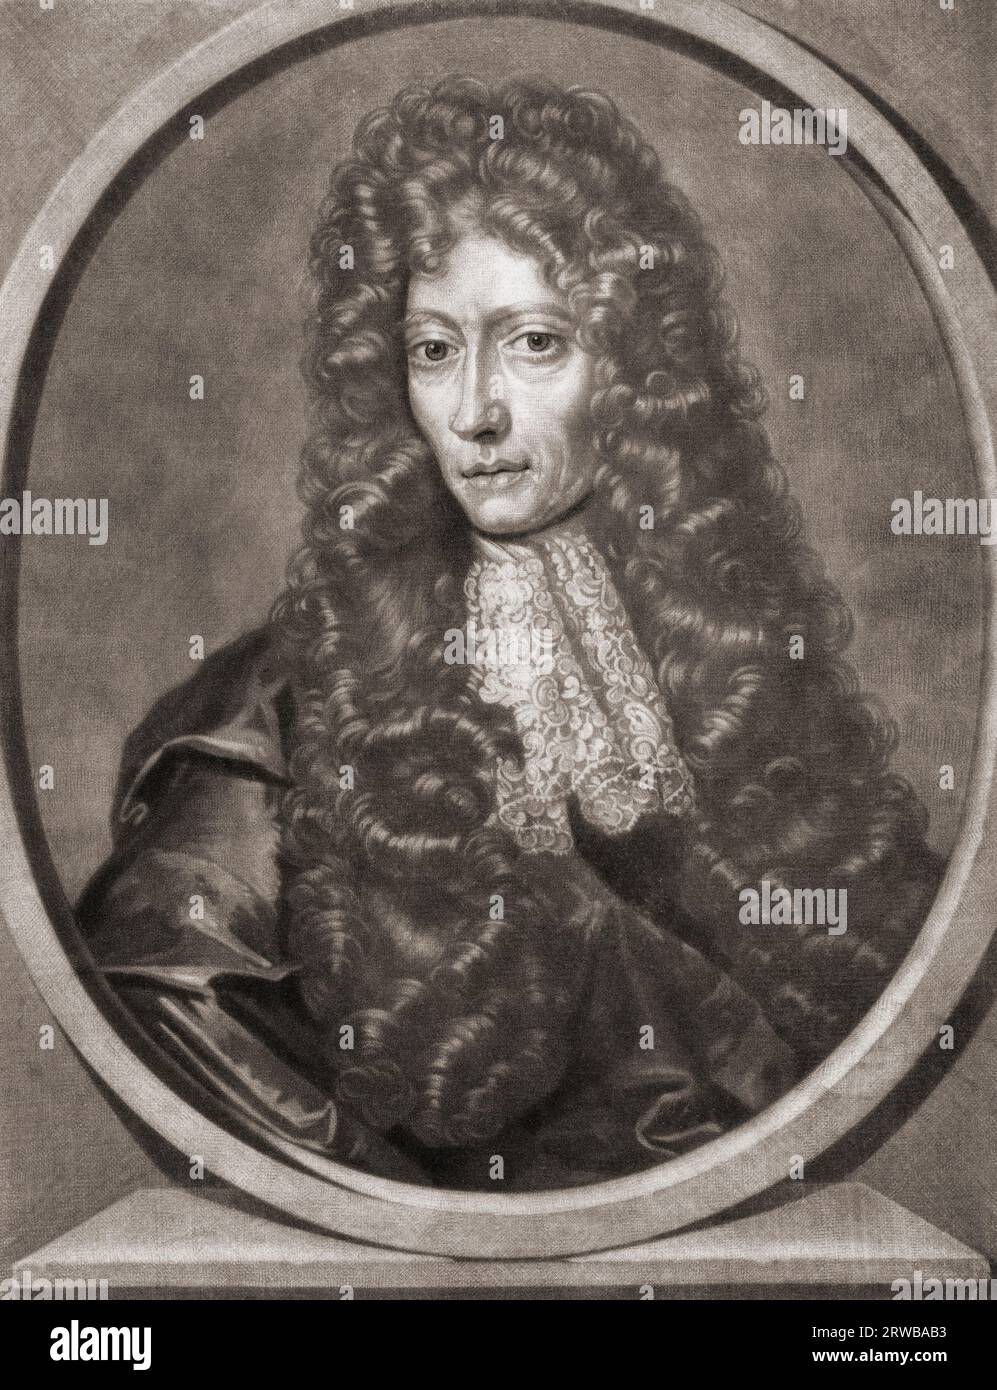 Robert Boyle, 1627 - 1691. Anglo-Irish chemist, natural philosopher, physicist and inventor.  From a print by Pieter Schenk. Stock Photo